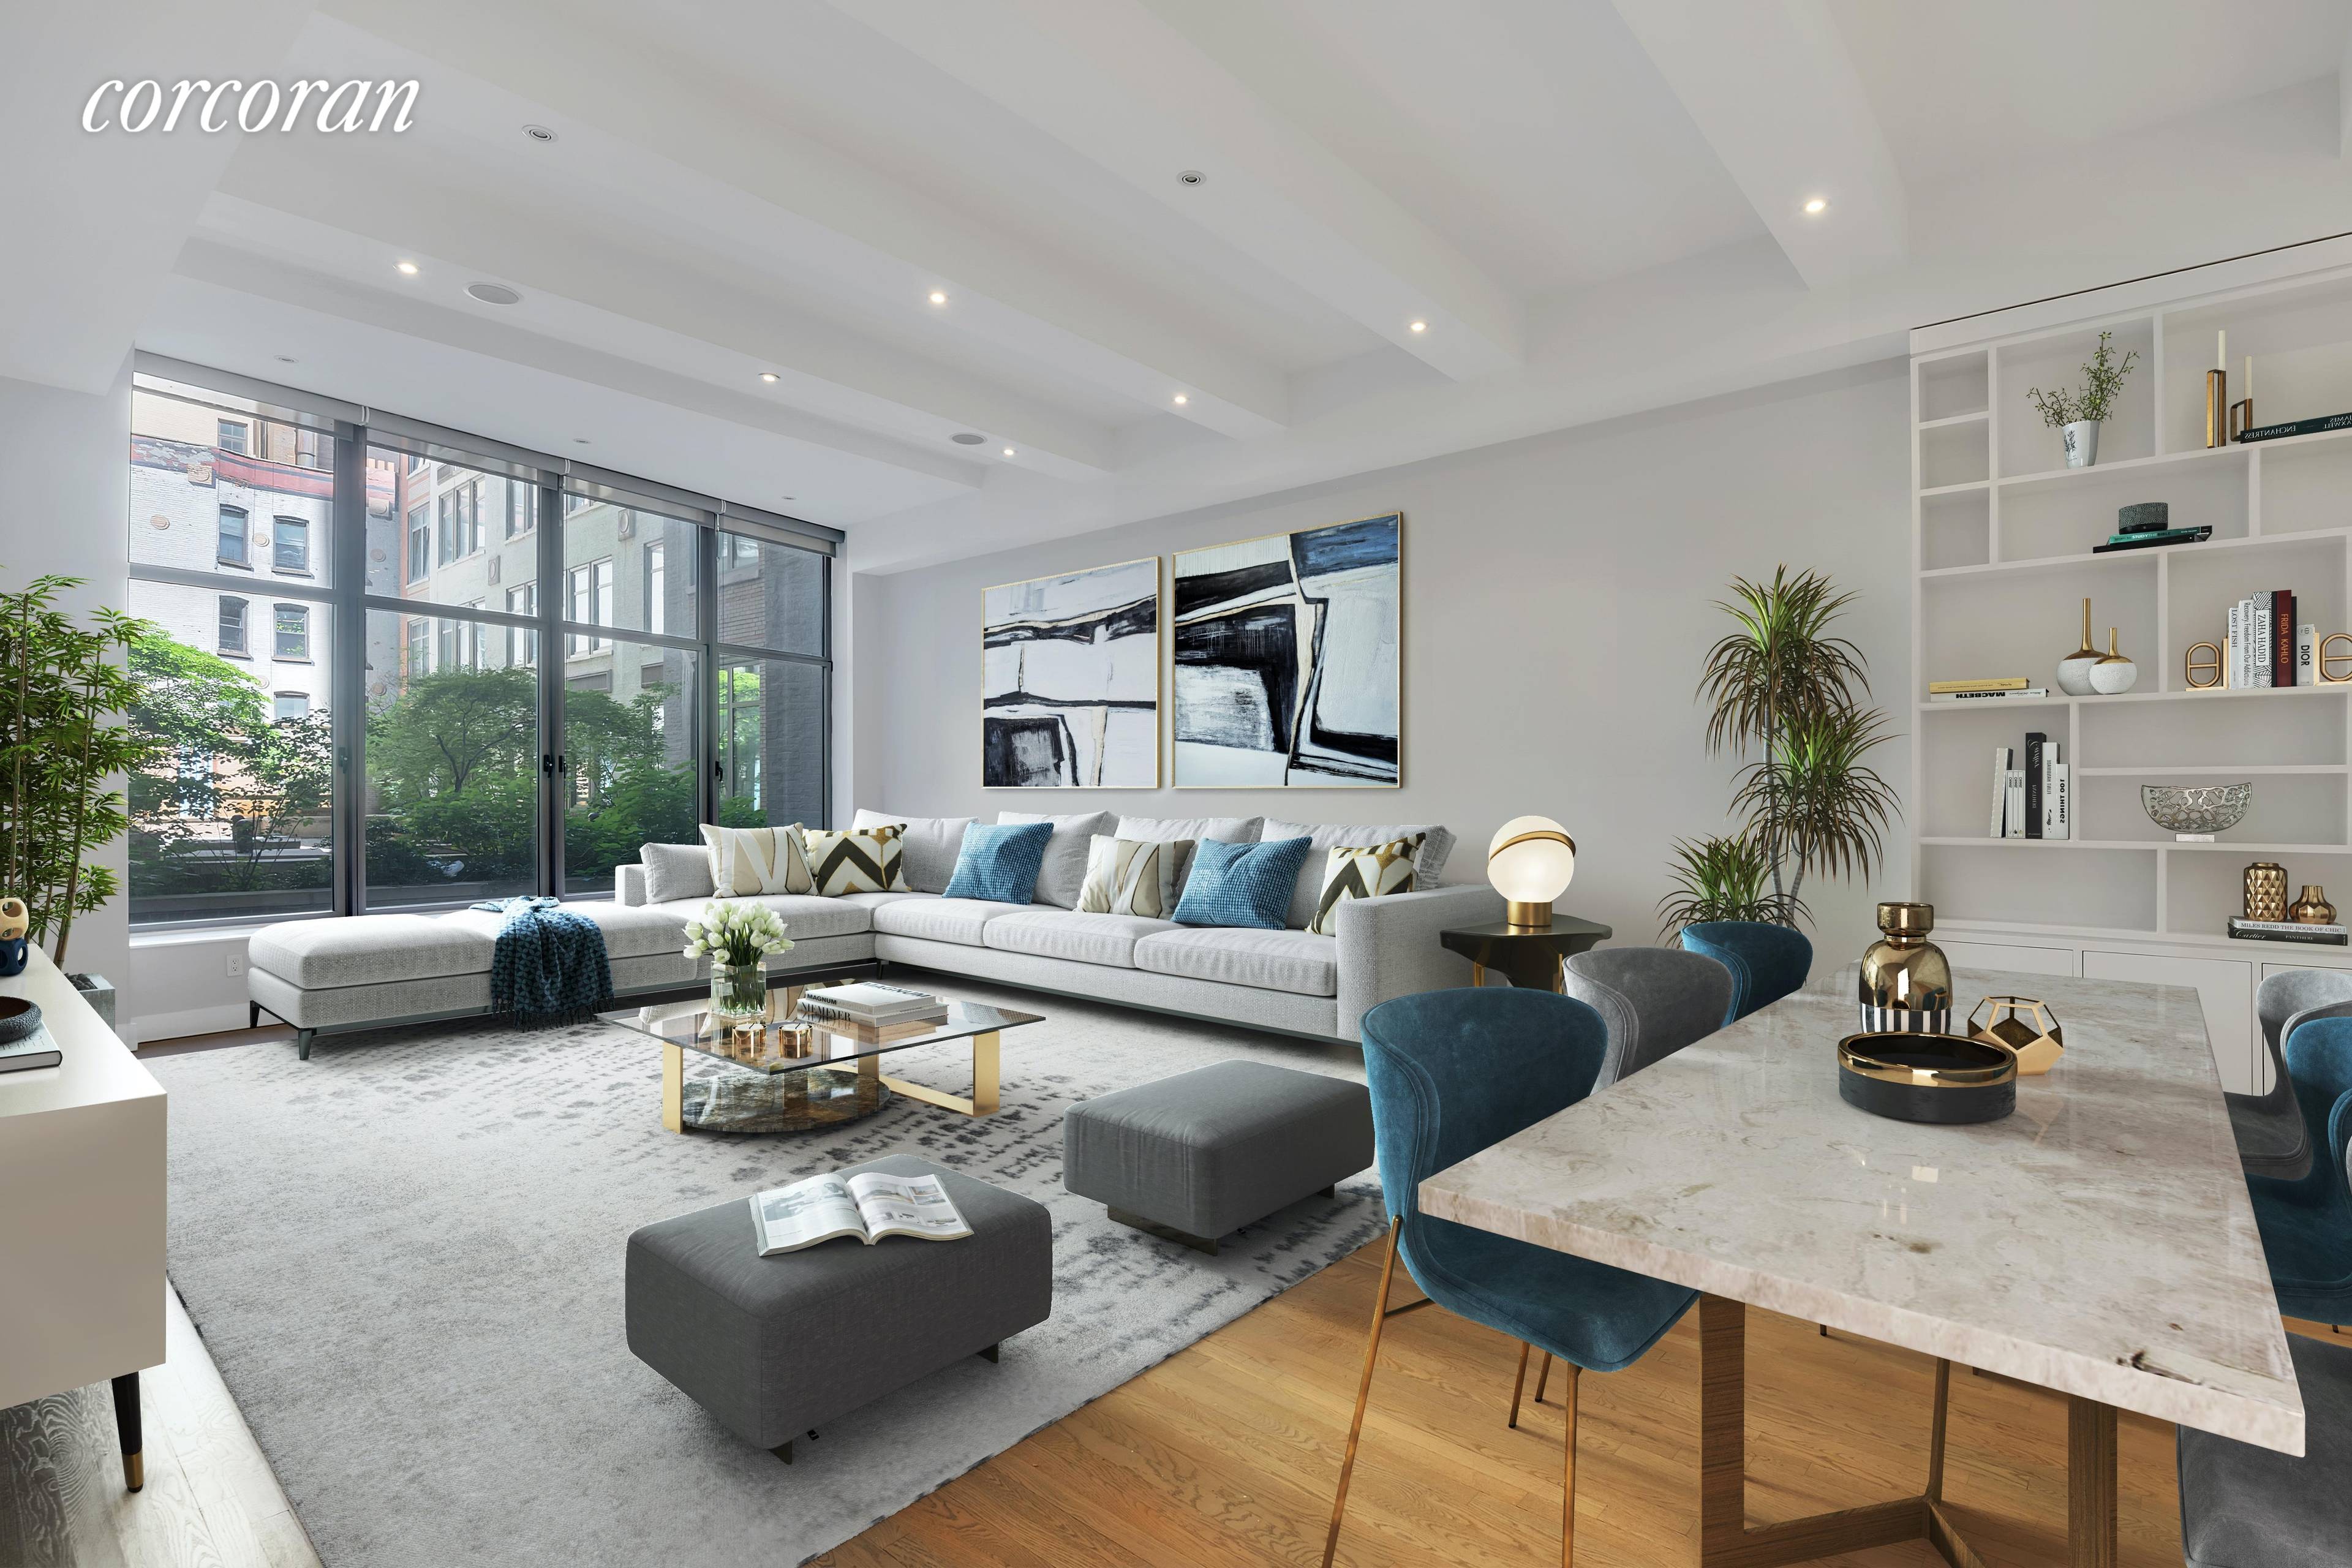 In one of the most sought after buildings in the heart of Chelsea, apartment 3R in the Chelsea Mercantile is the largest individual loft with views of a landscaped courtyard ...